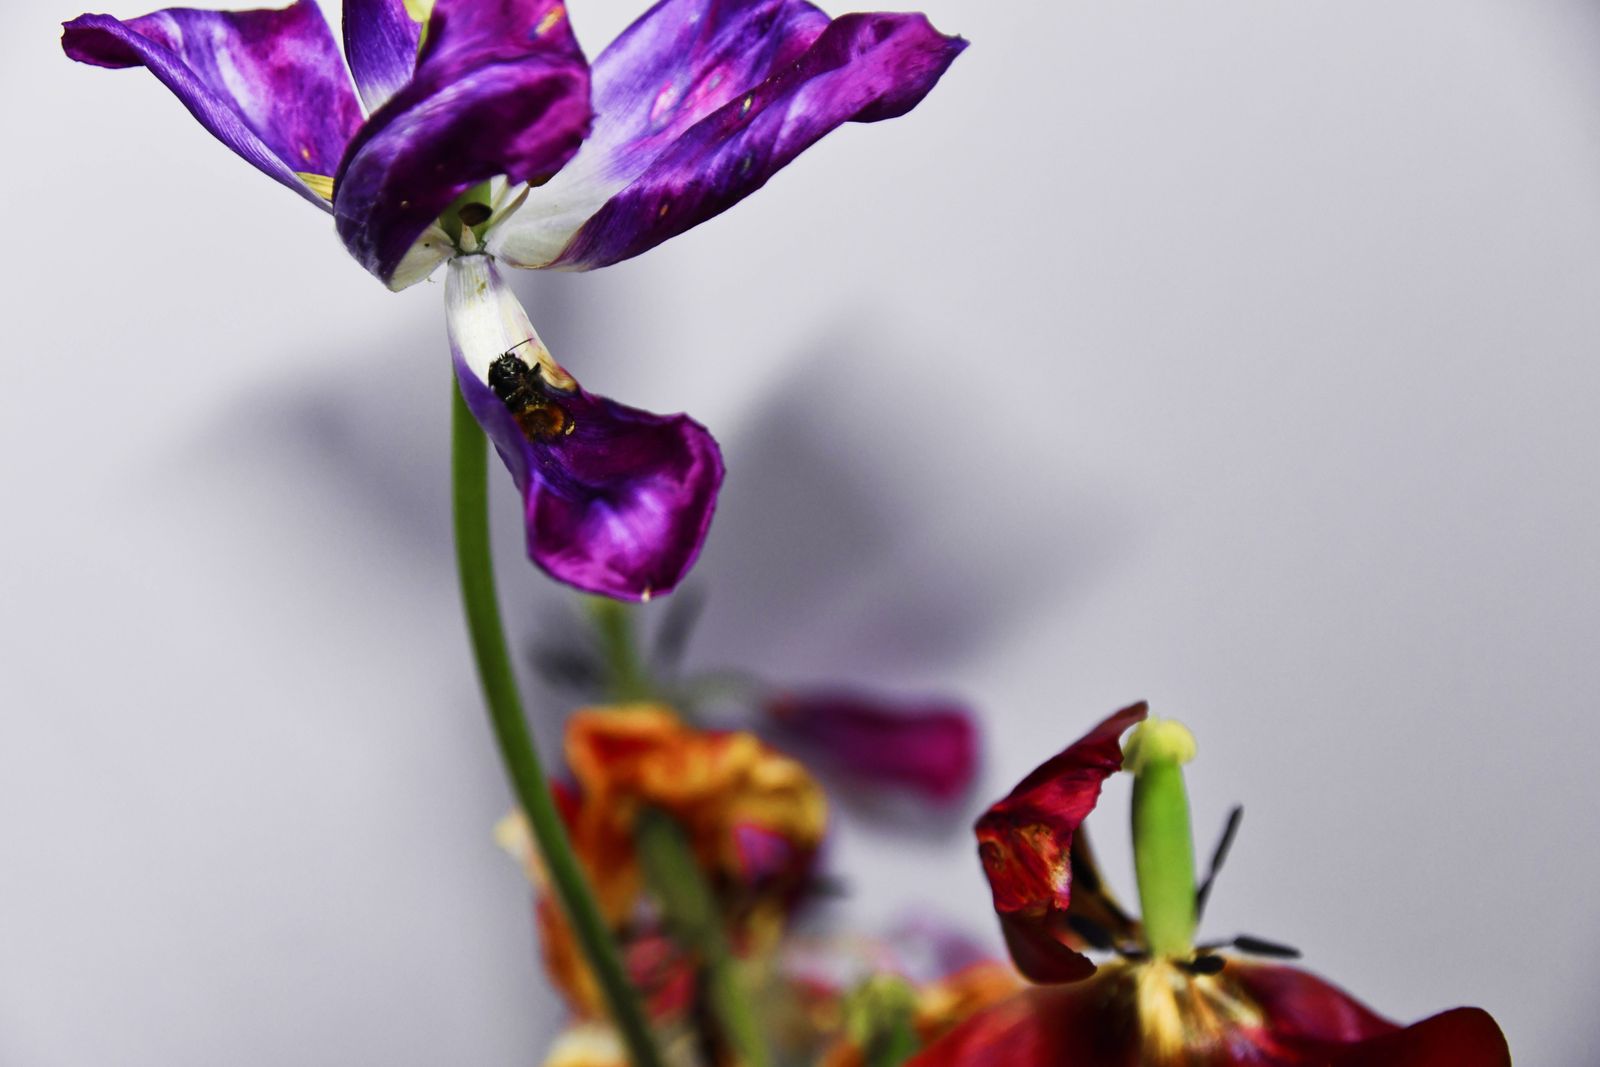 © Elena Bandurka - Image from the Tulips from my garden photography project